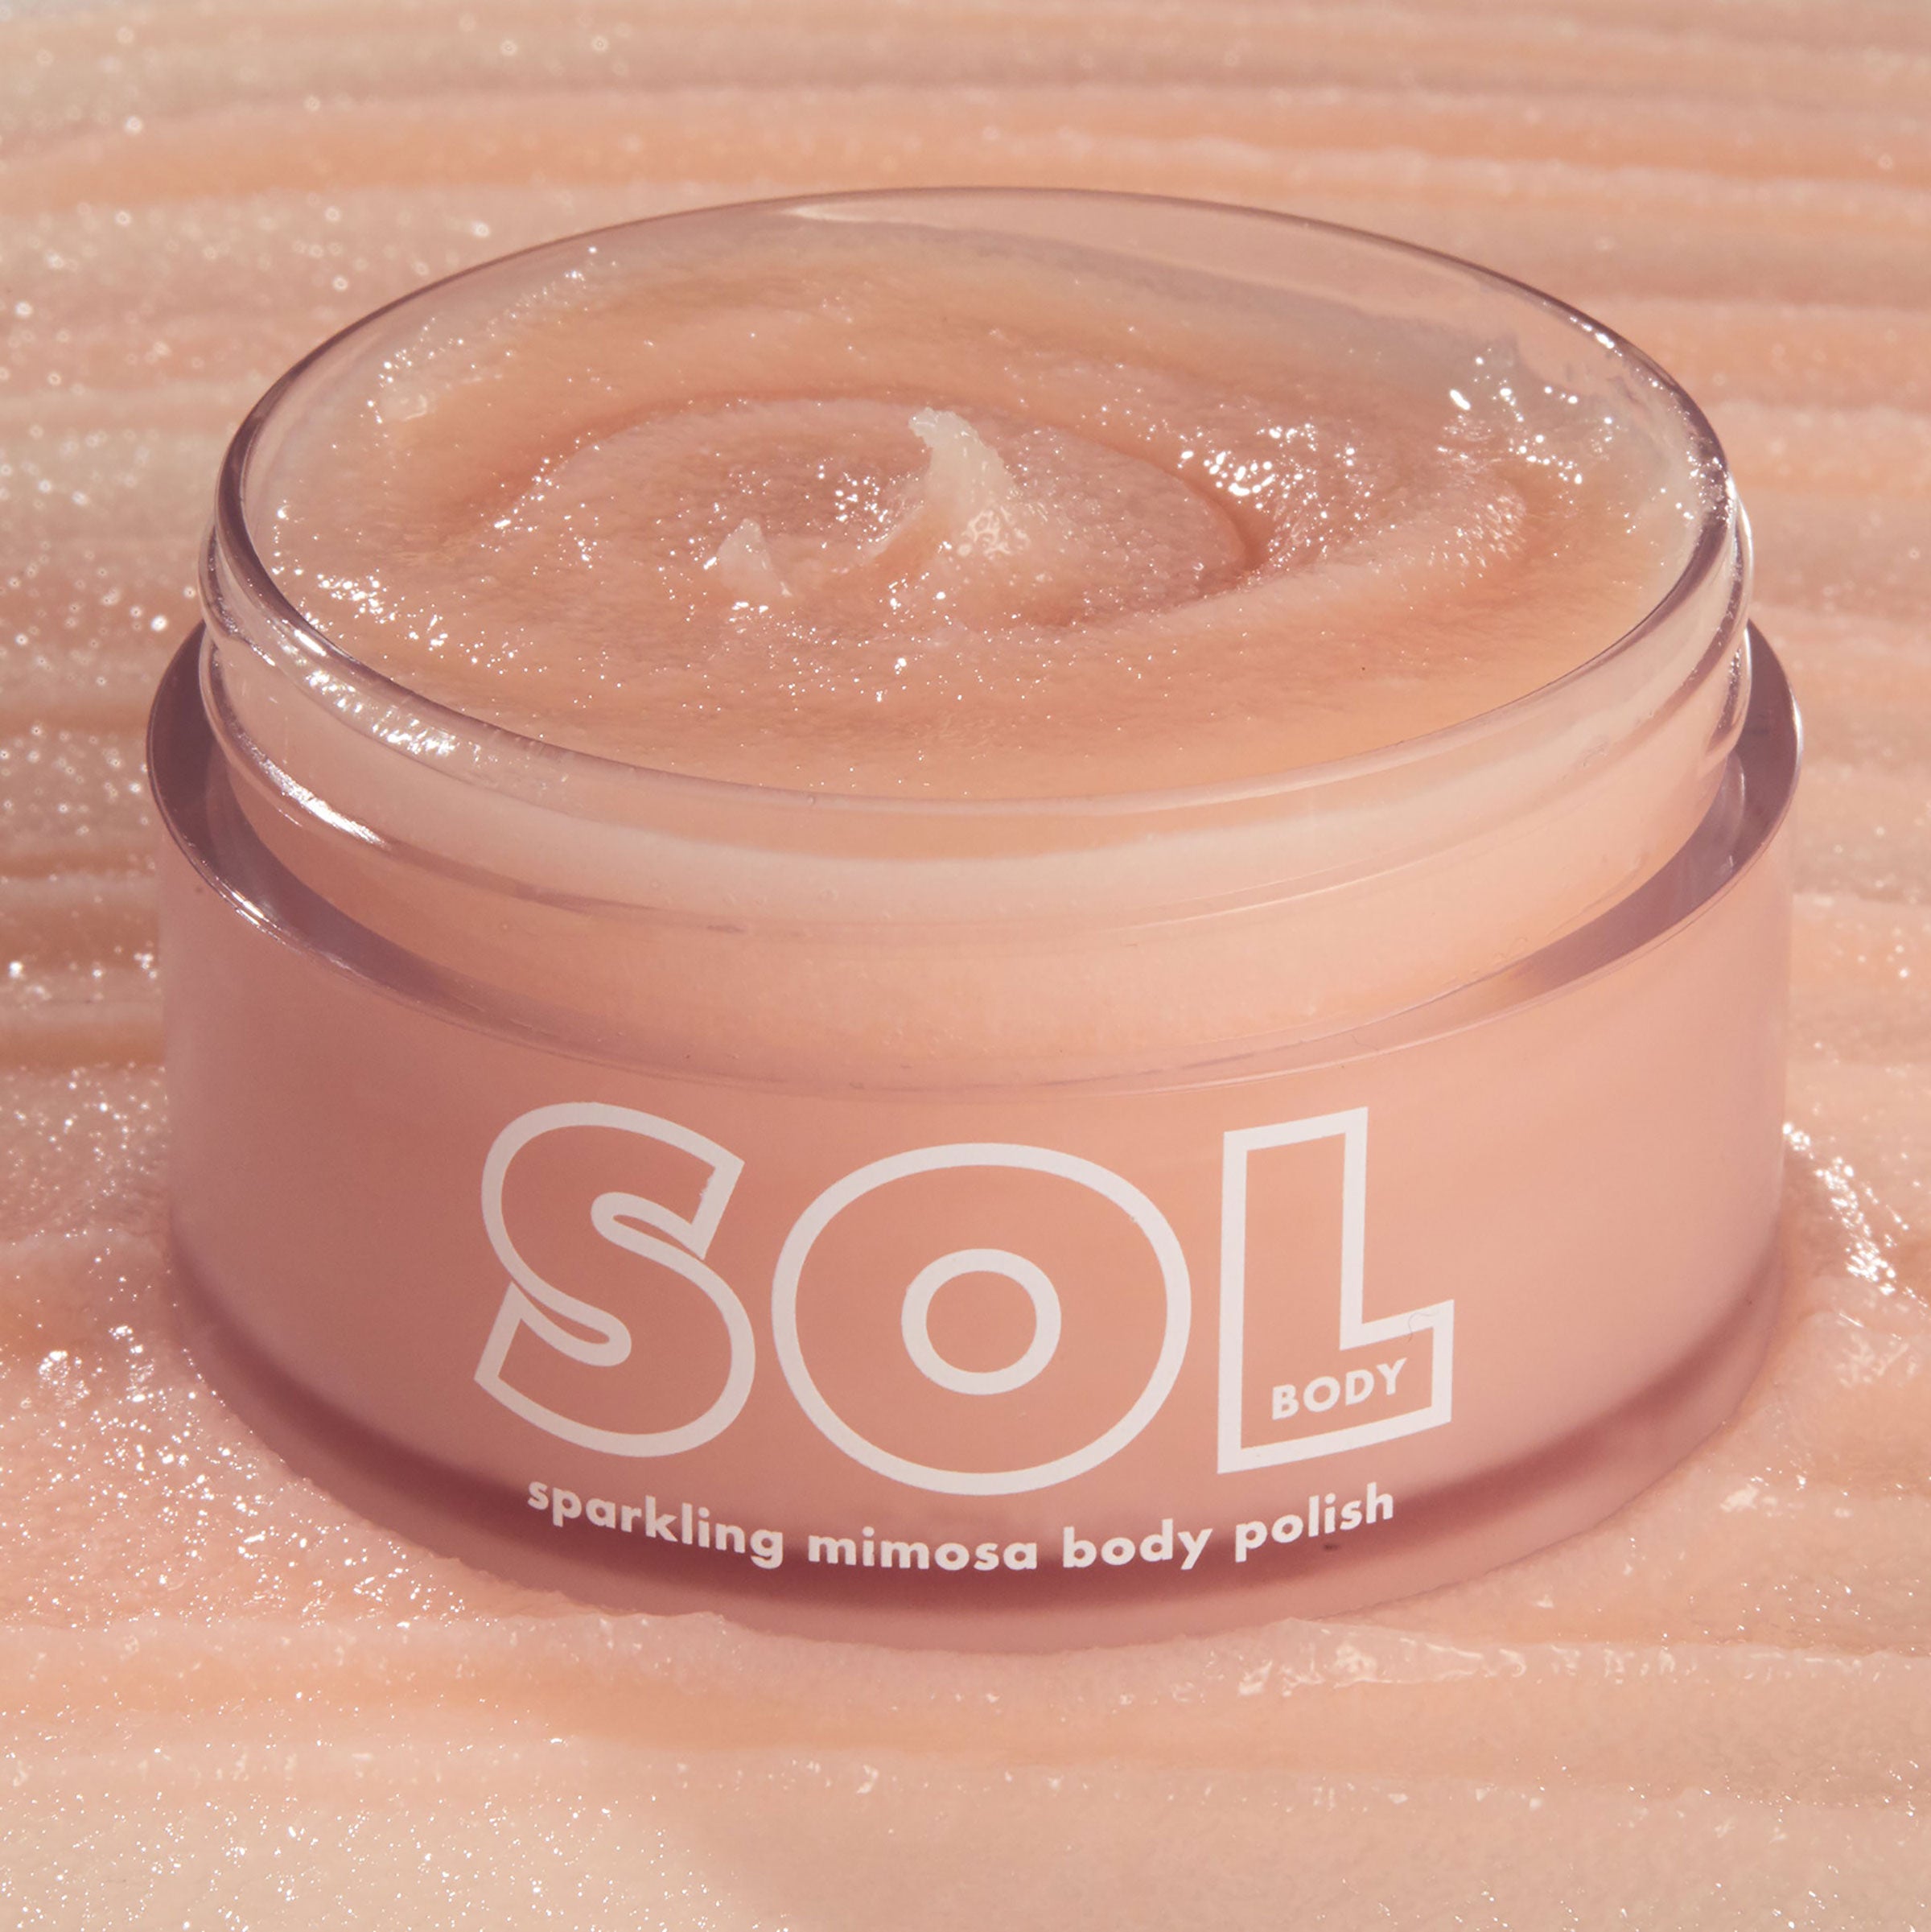 SOL Body Sparkling Mimosa Body Polish – A luscious body polish gently buffs and exfoliates to reveal skin so silky soft and smooth.  